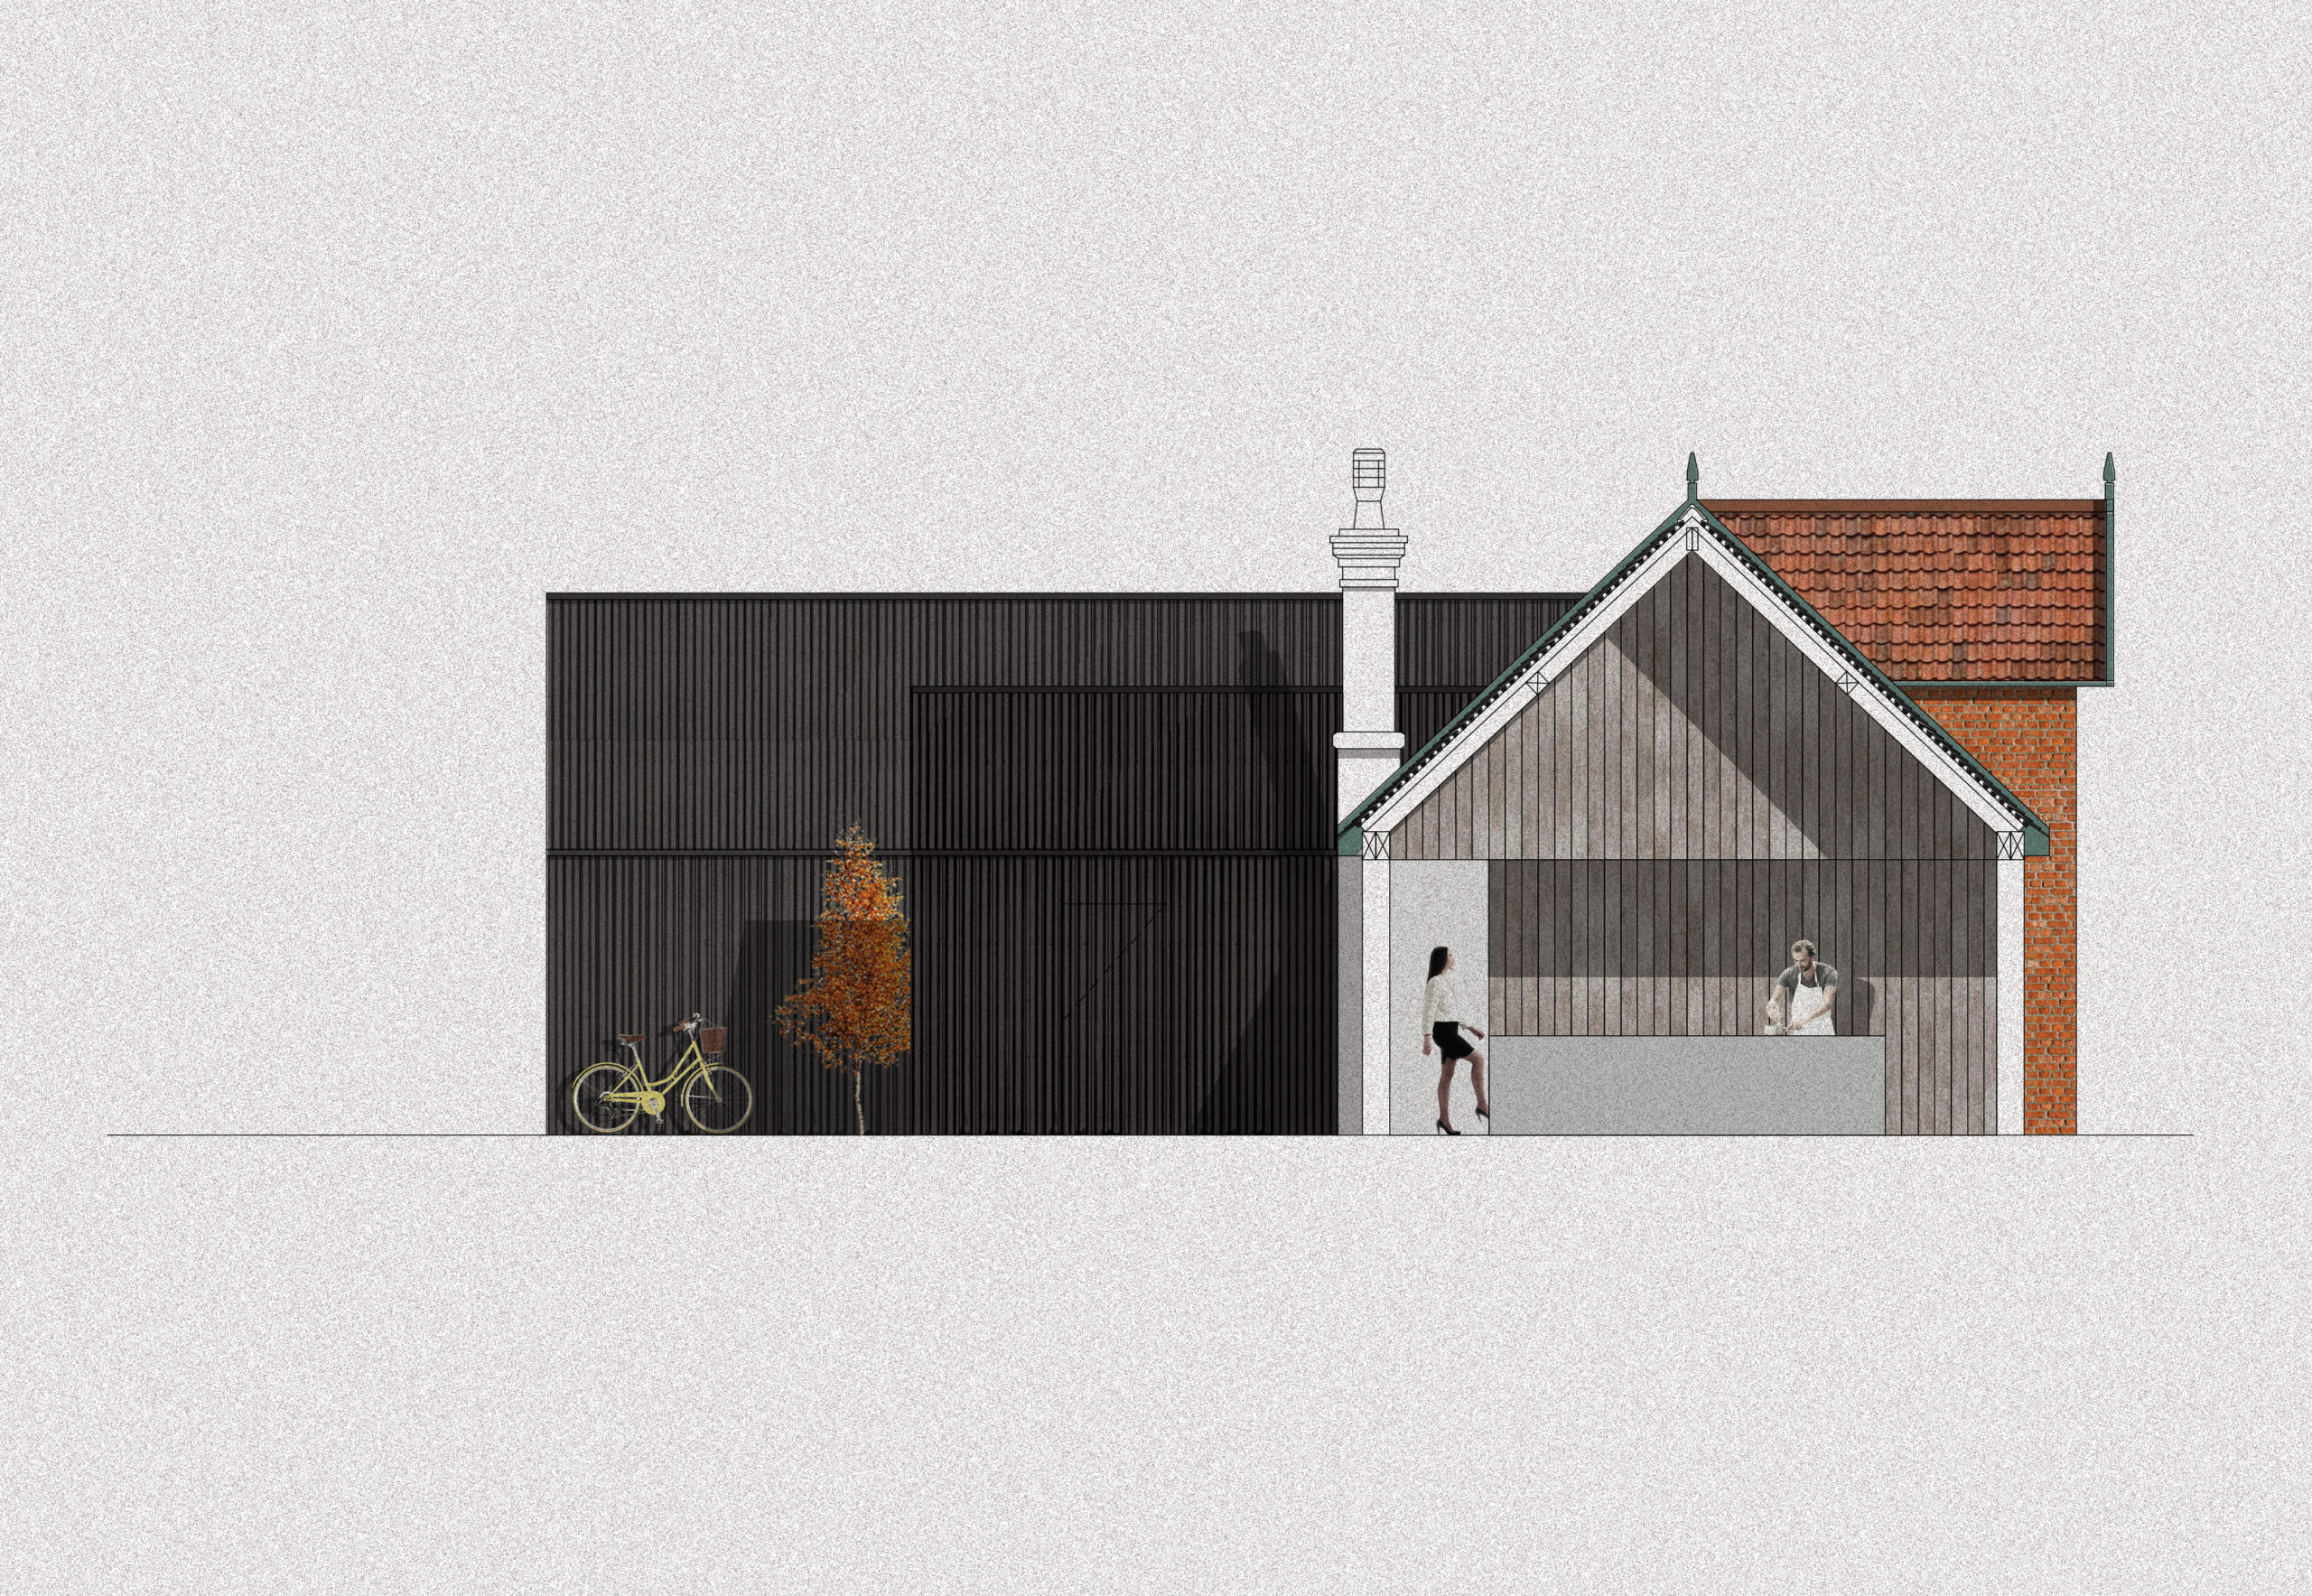 /Volumes/LaCie/The Church Rooms/proposed plans.dwg